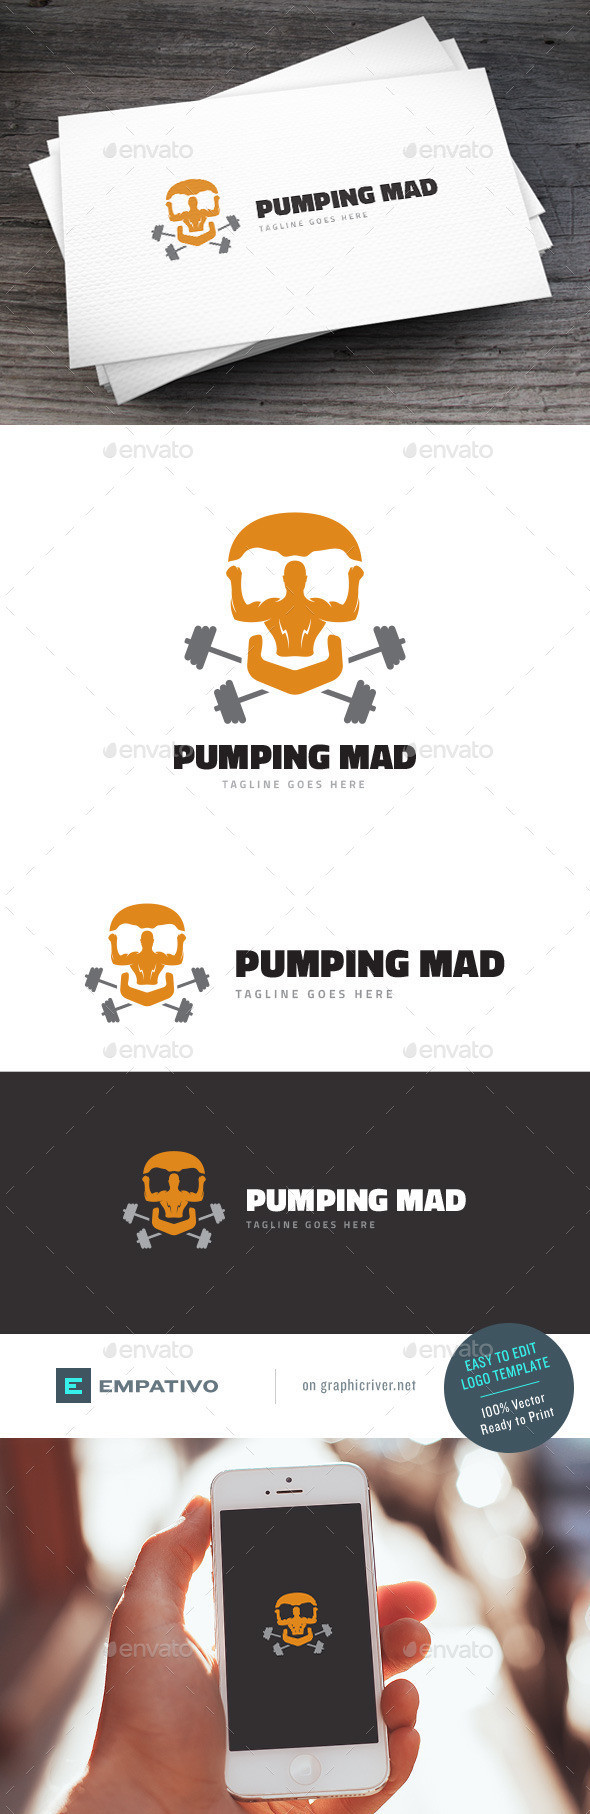 Pumping mad logo template